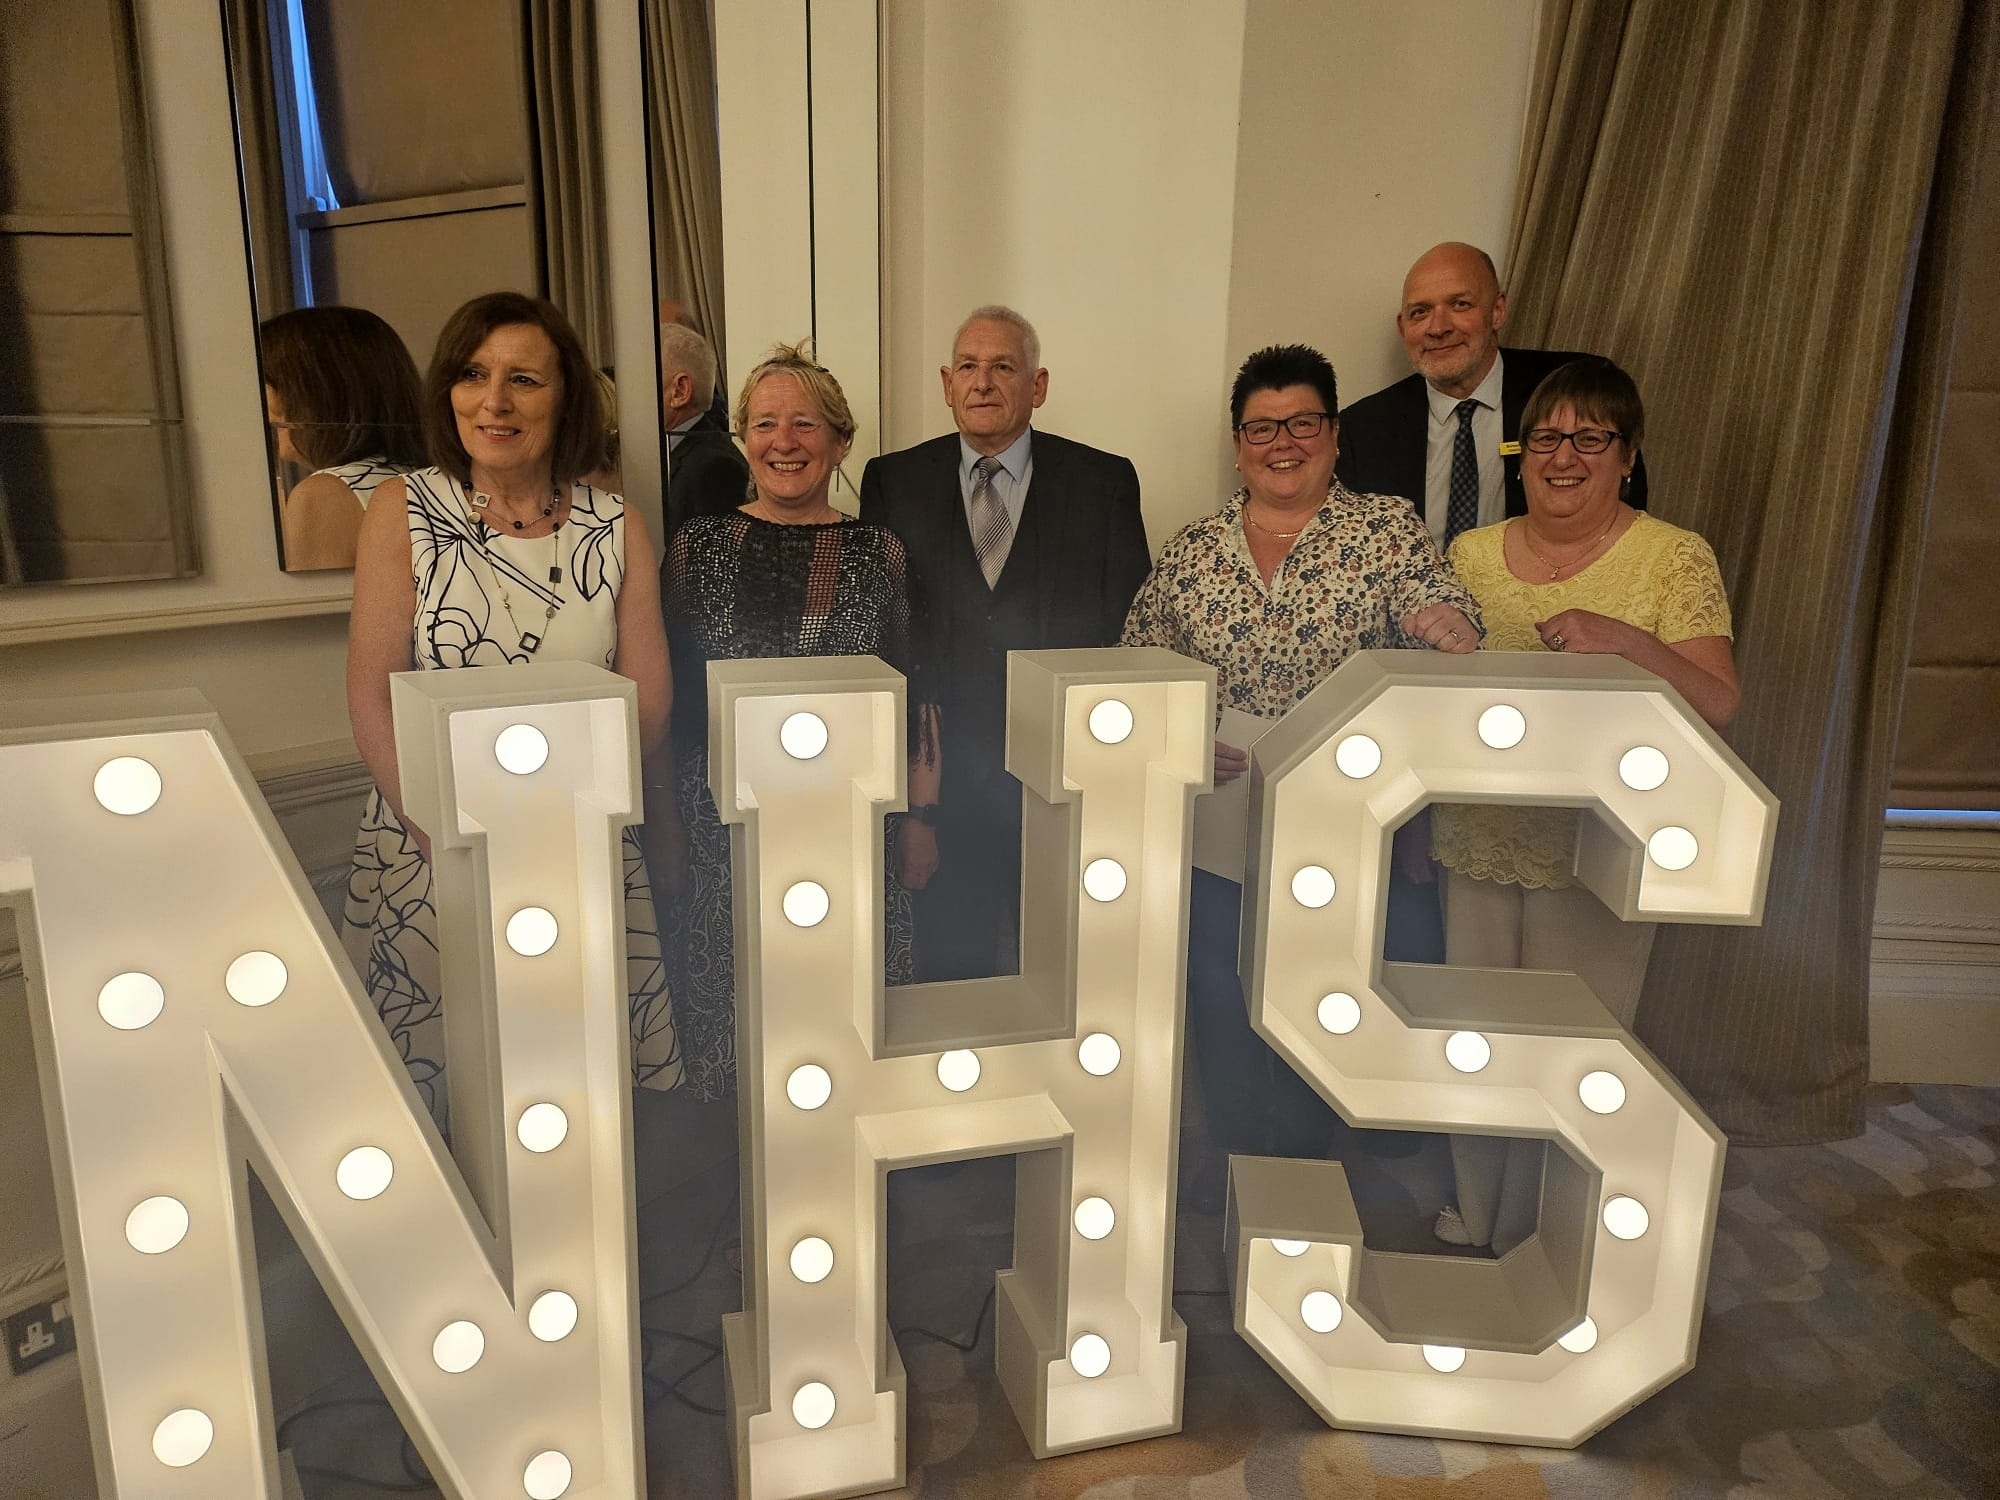 NHS staff standing together behind giant letters that spell NHS.